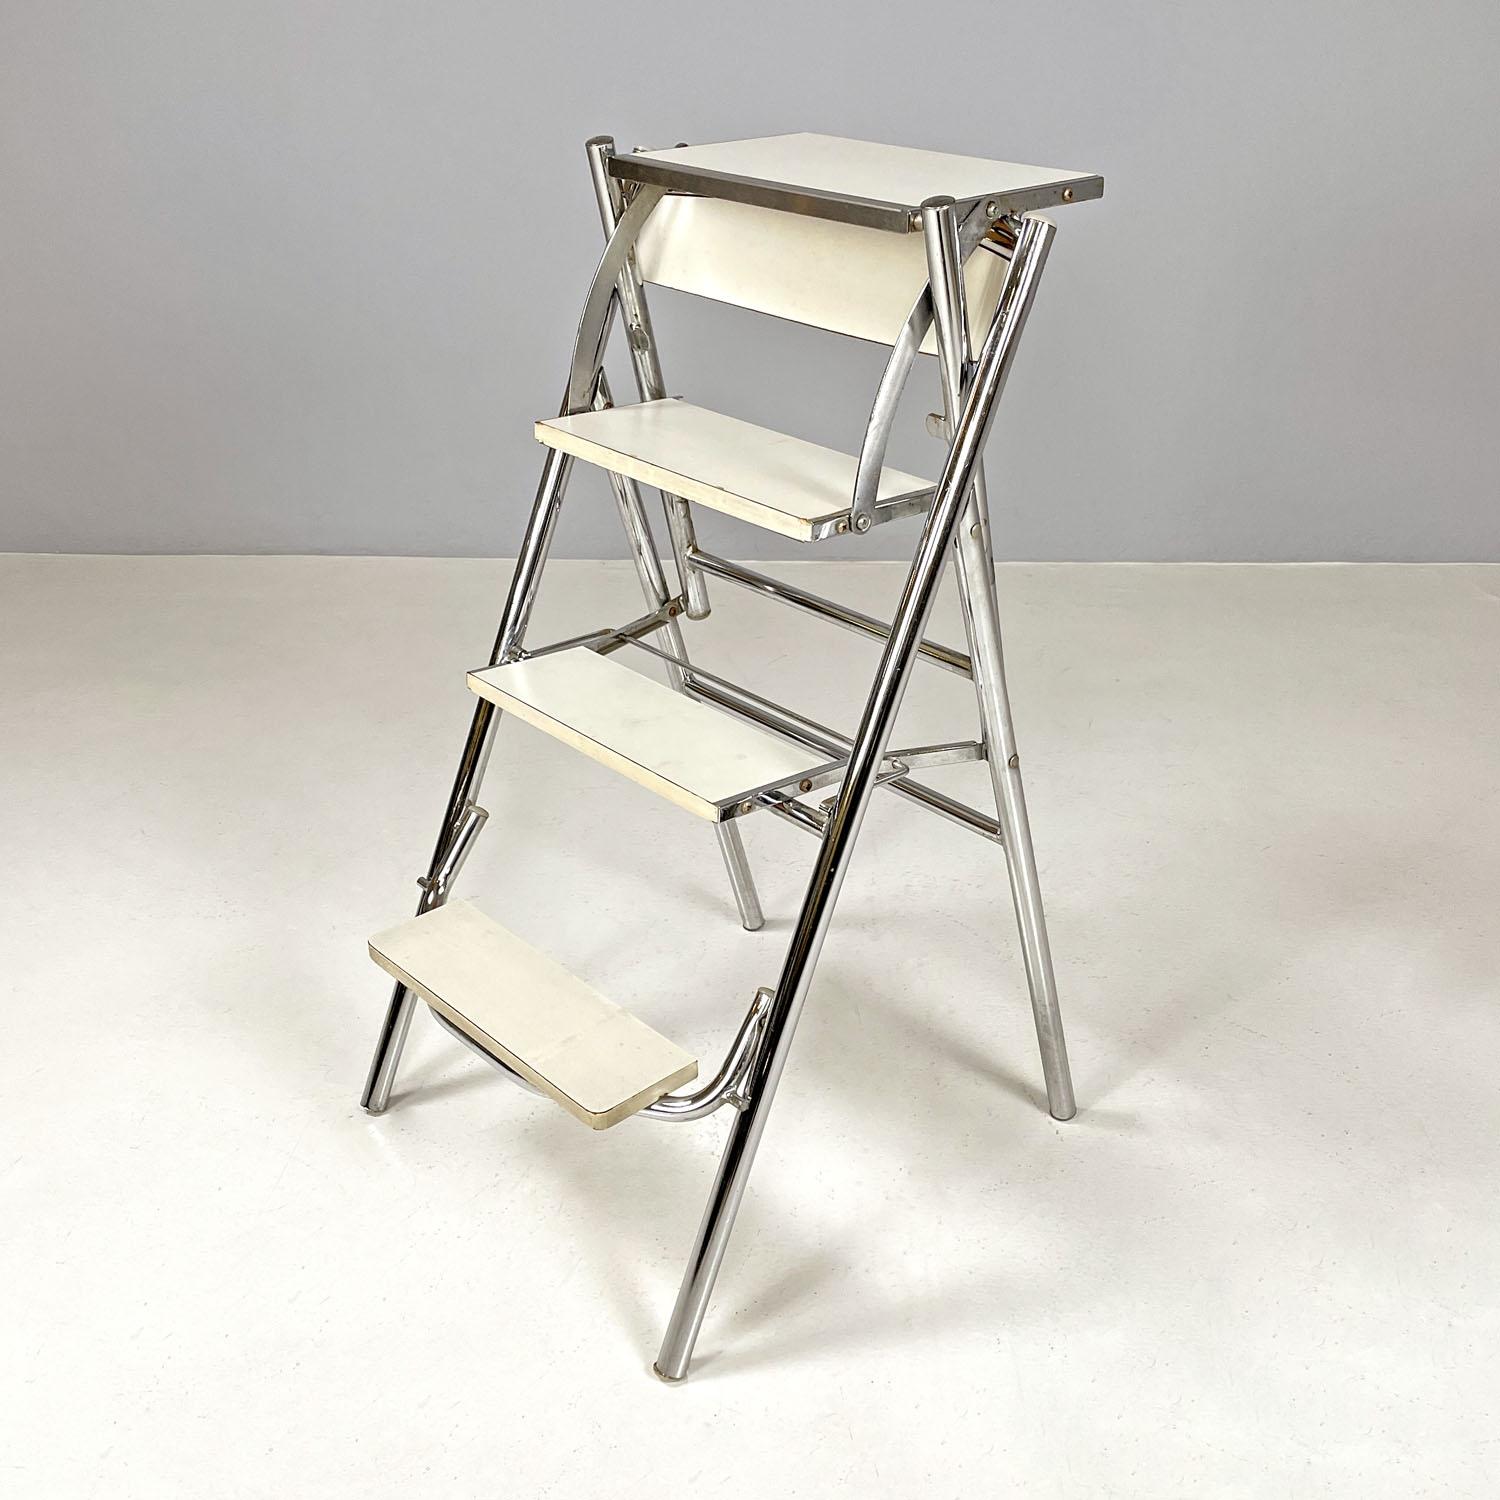 Modern Italian modern steel and white laminate chair convertible into a ladder, 1970s